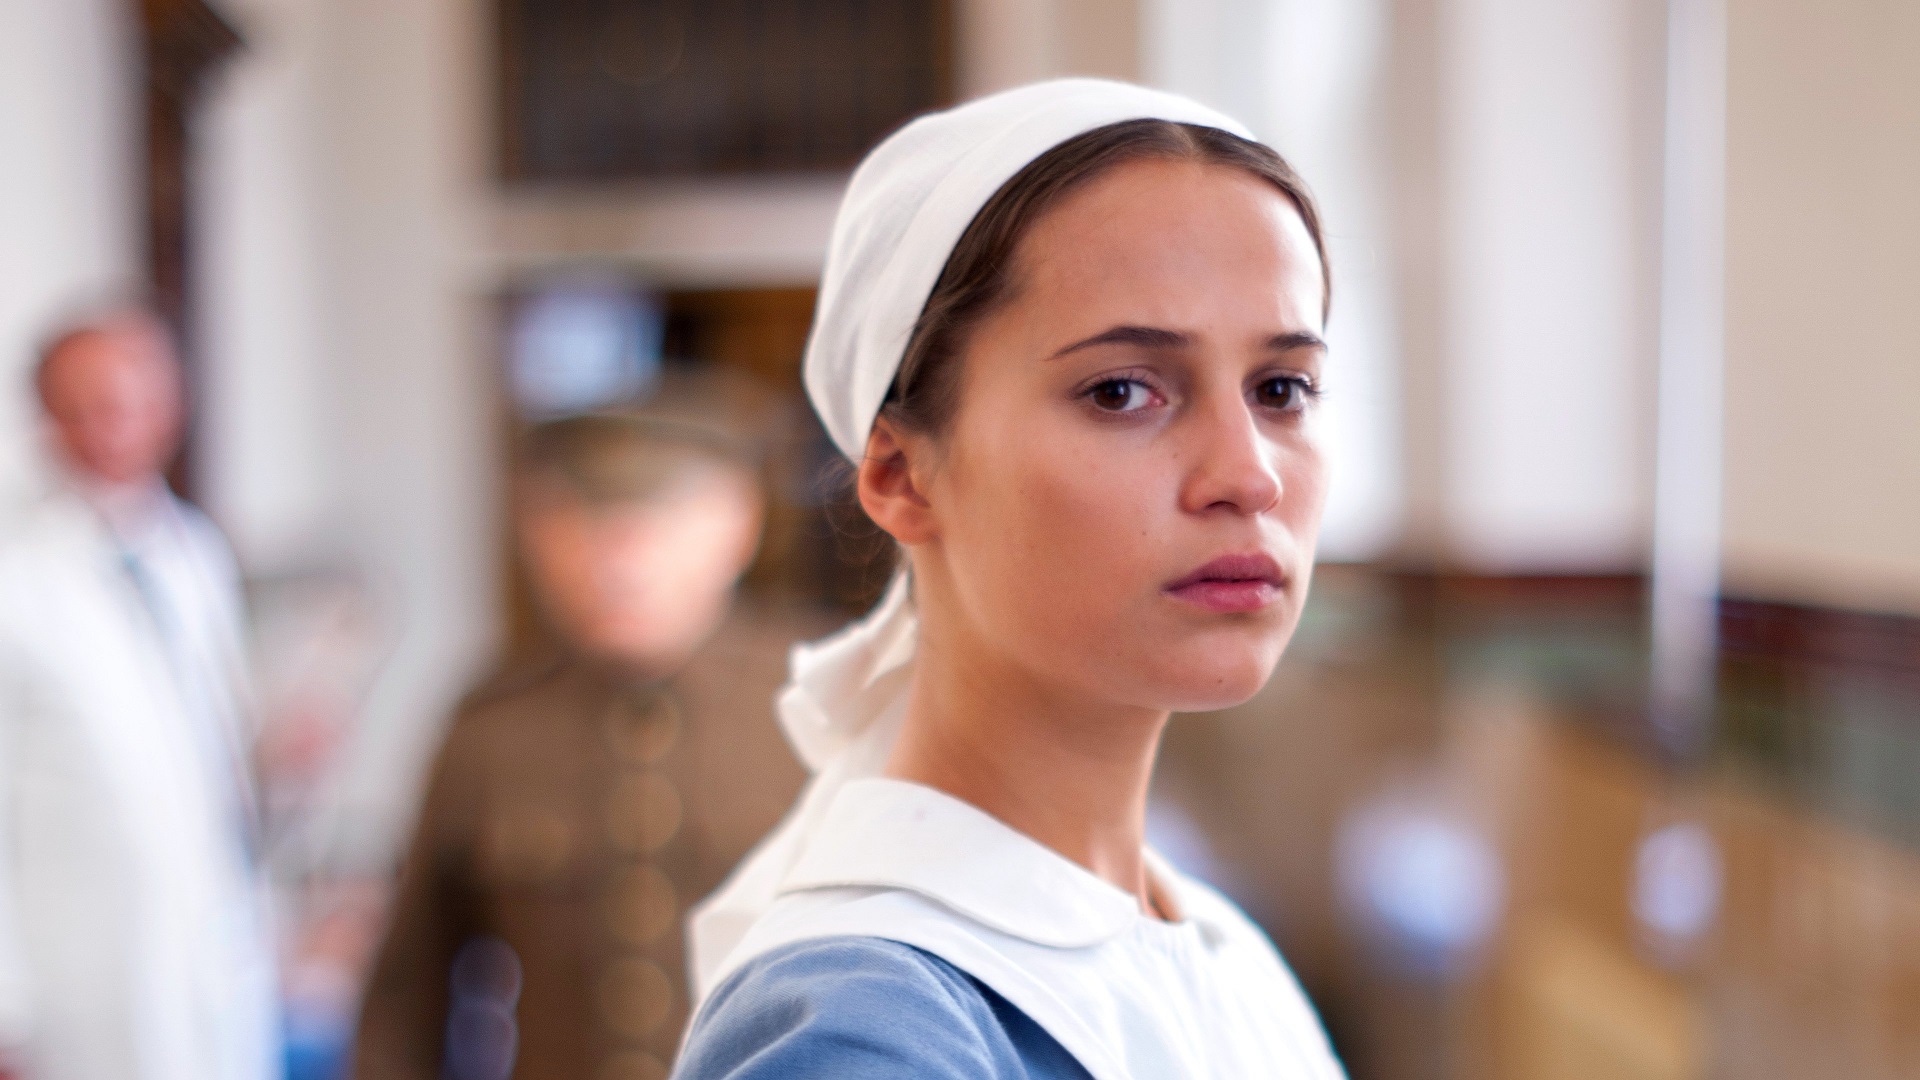 Wallpaper Alicia Vikander, Testament of Youth, 2014 movie, celebrity, actress